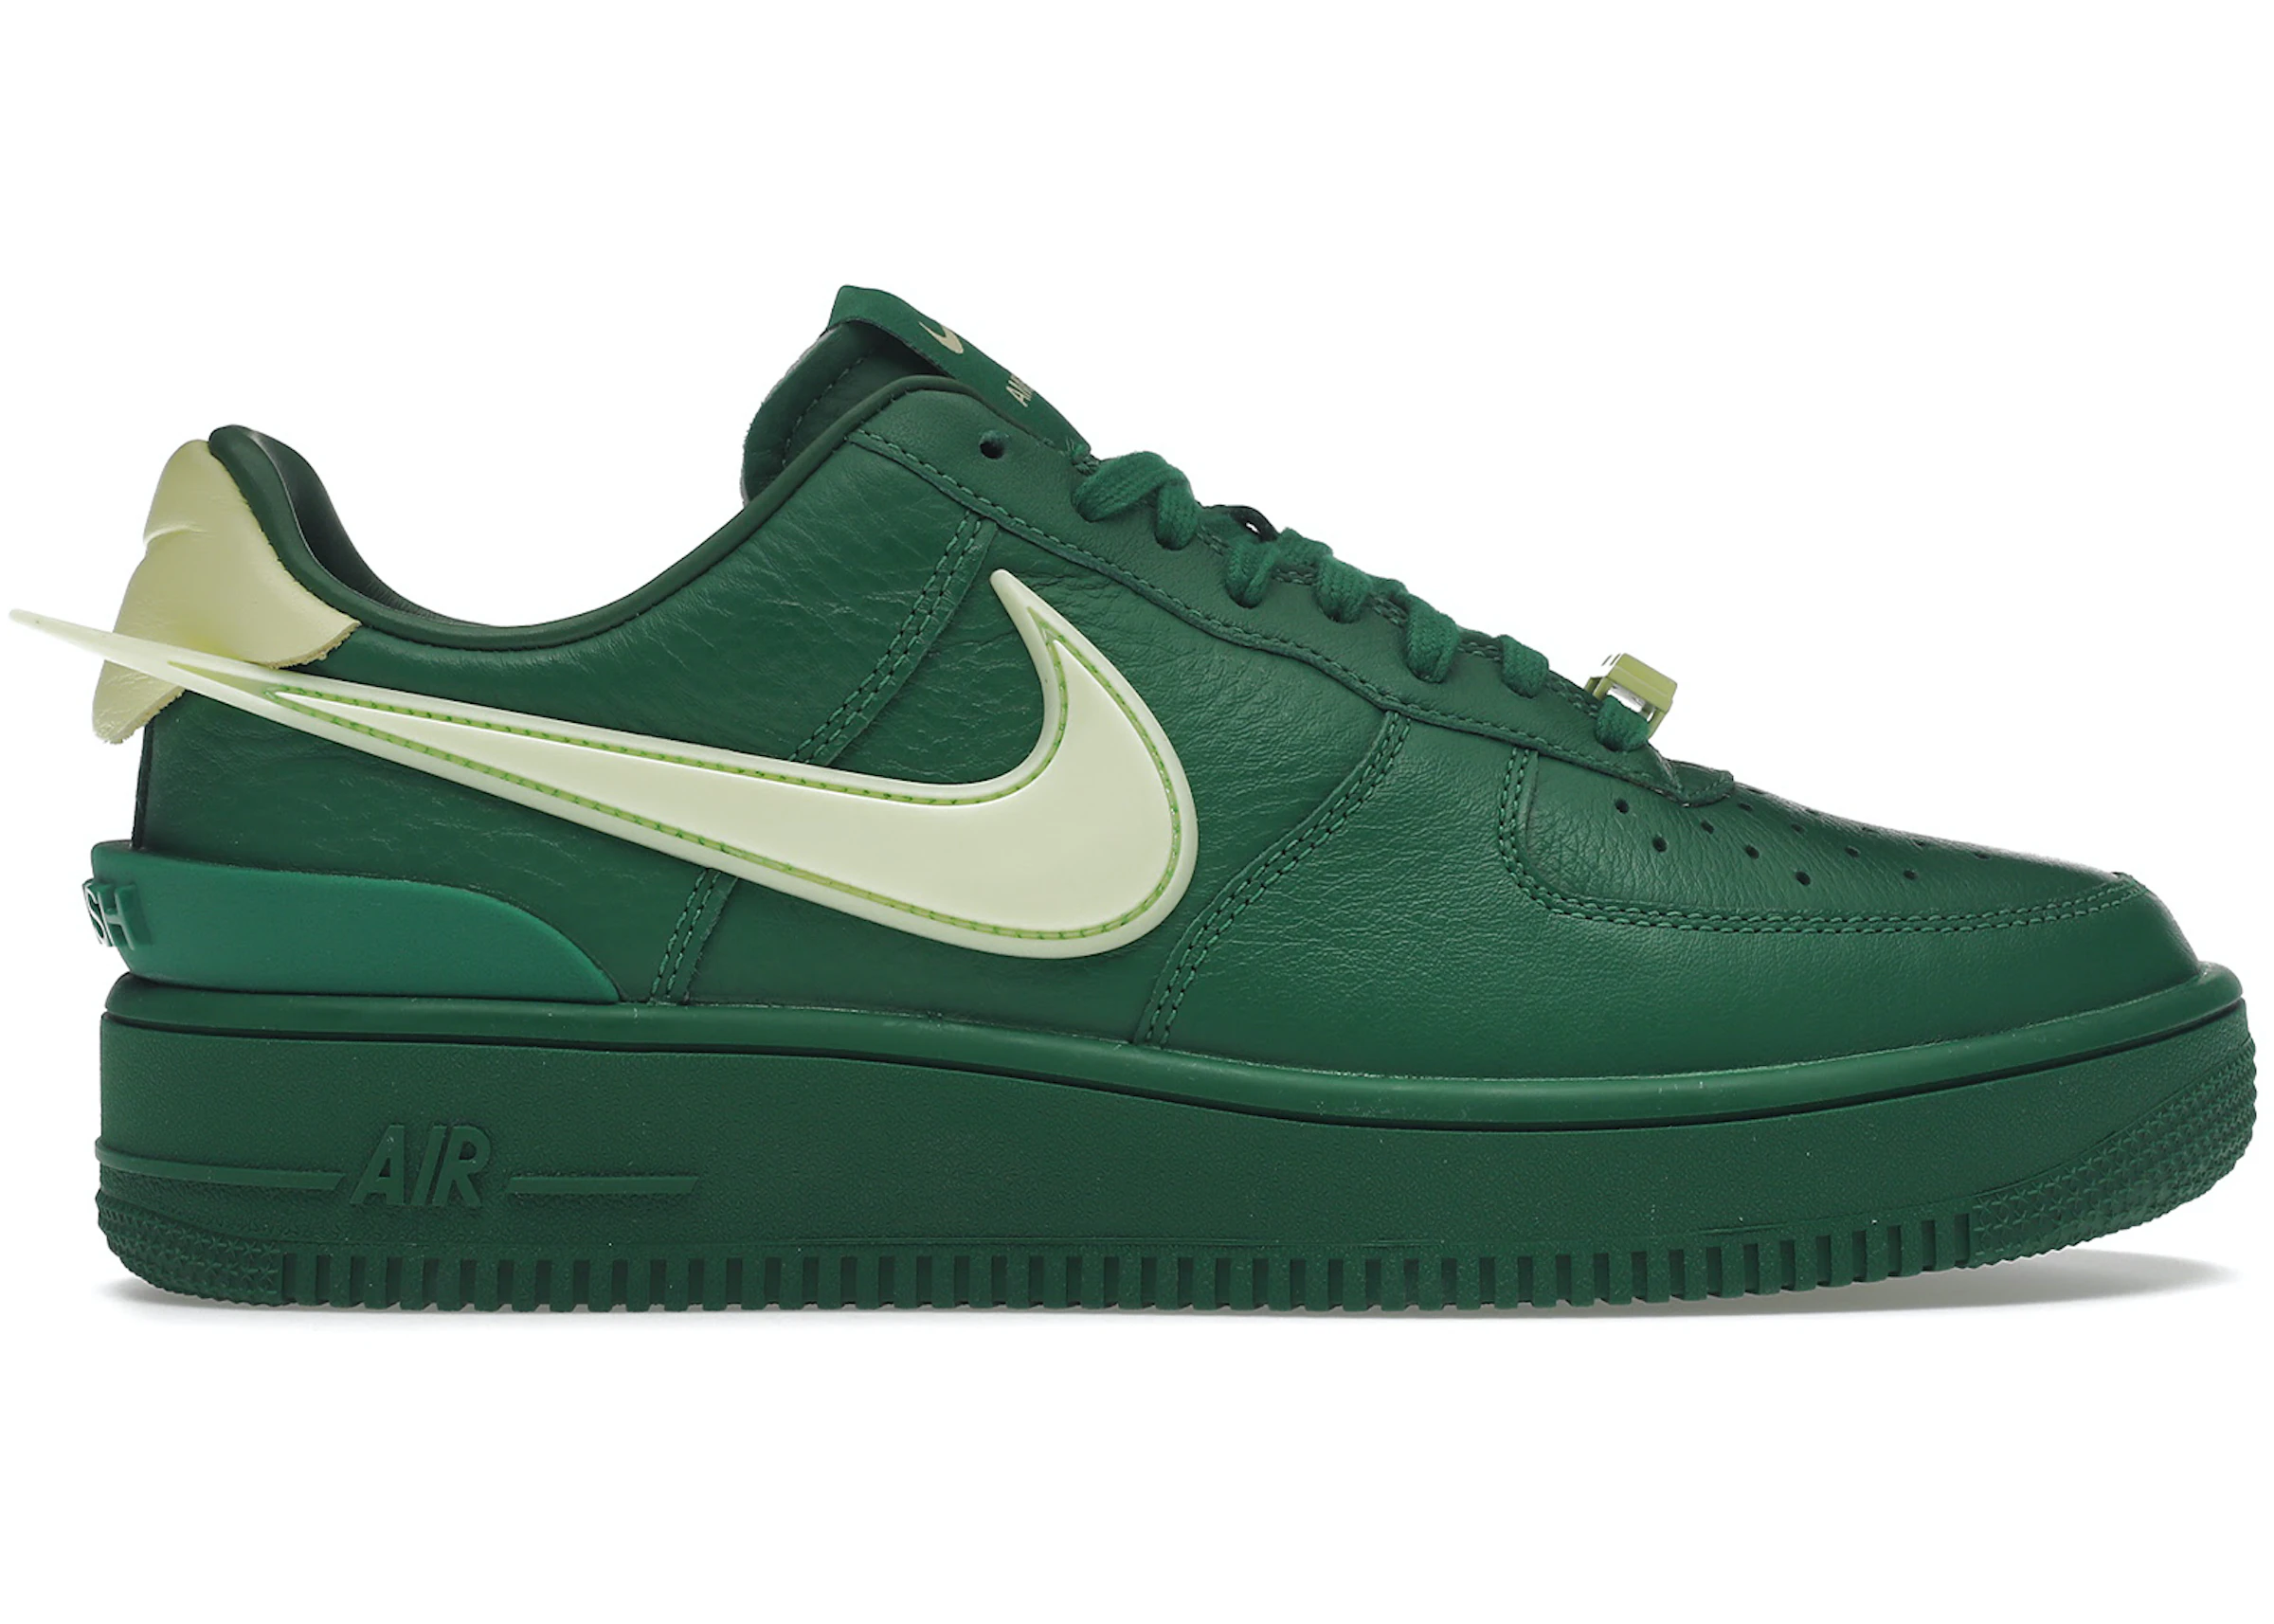 Take out anytime fitting Nike Air Force 1 Low SP AMBUSH Pine Green - DV3464-300 - US